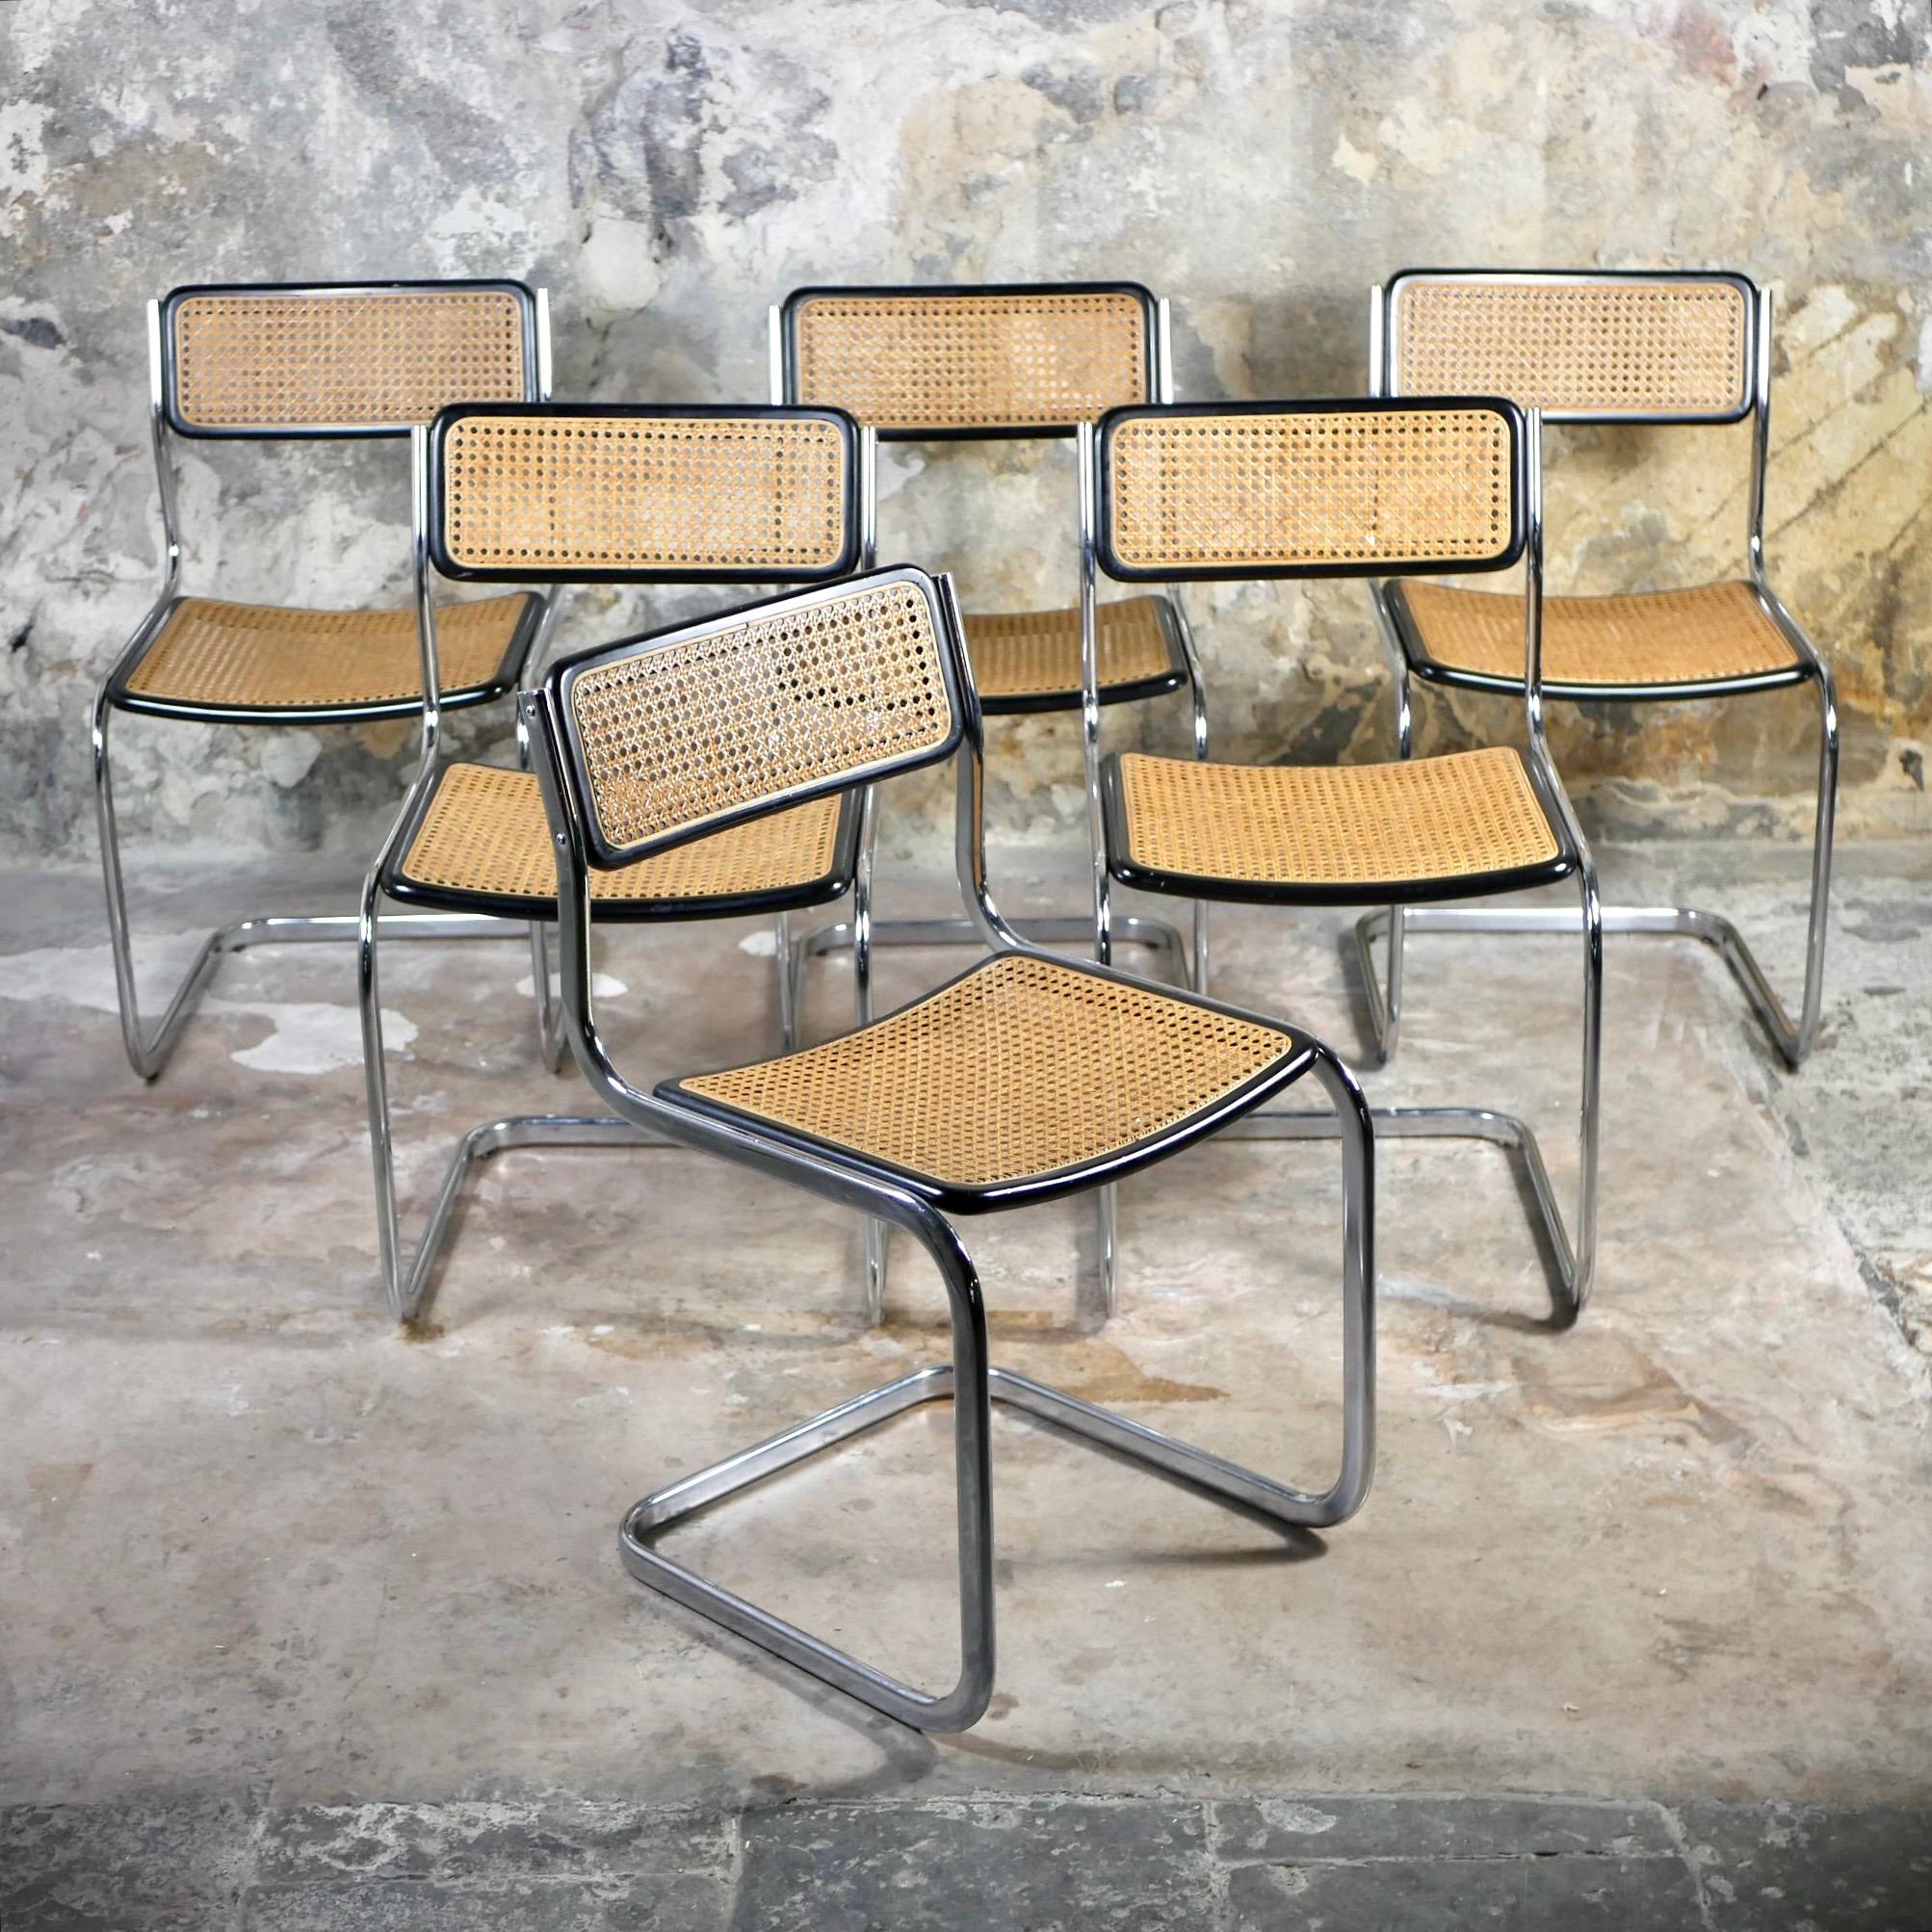 Set of 6 cane chairs from the 1970s in the style of Marcel Breuer's Cesca, made by Arrben in Italy. 
Some chairs are stamped 